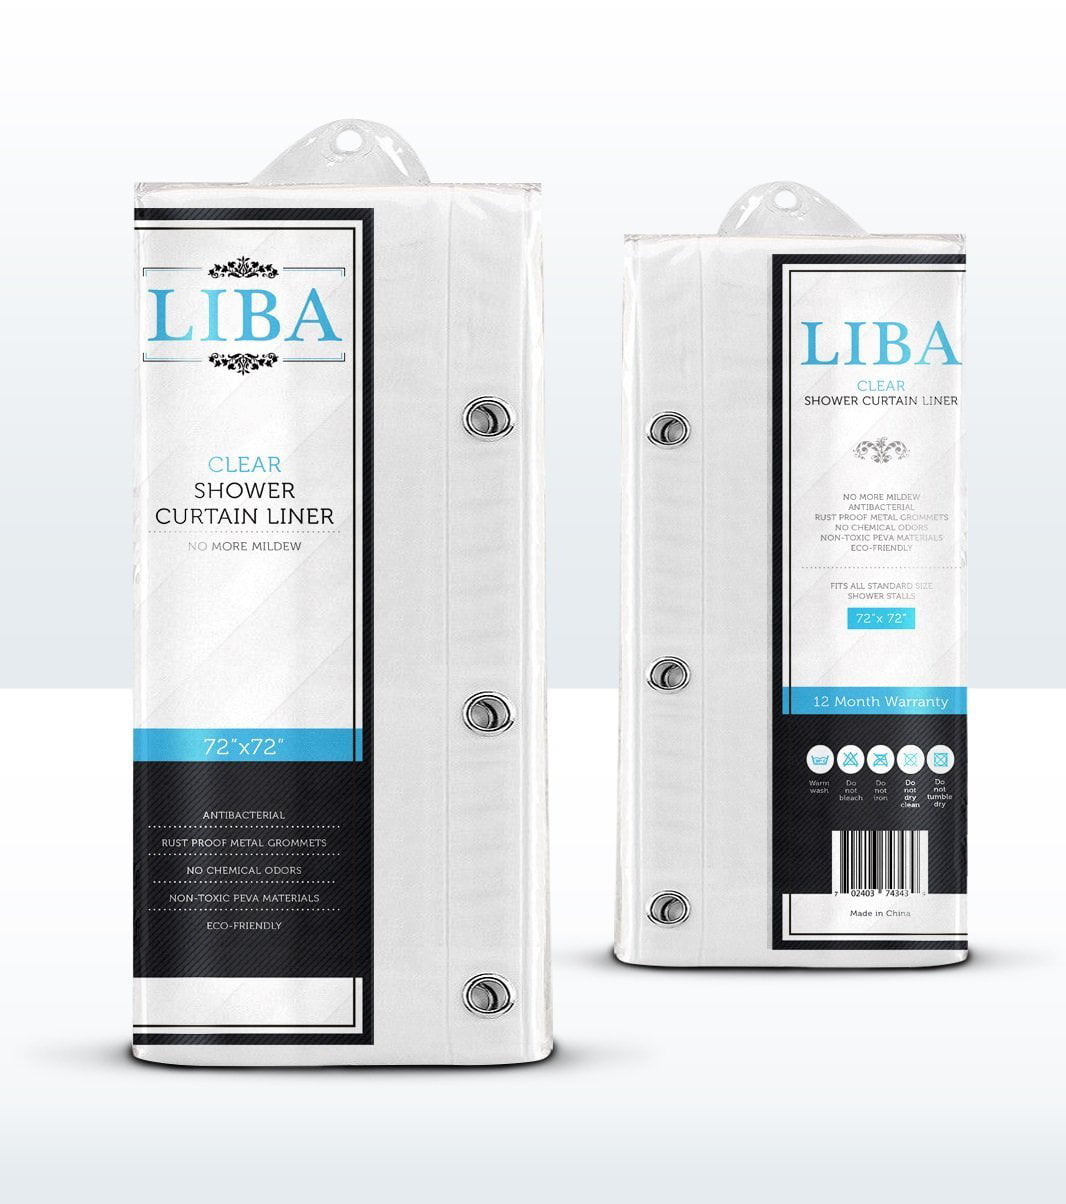 Liba Peva Antimicrobial Pvc Free Shower, Are Vinyl Shower Curtains Safe